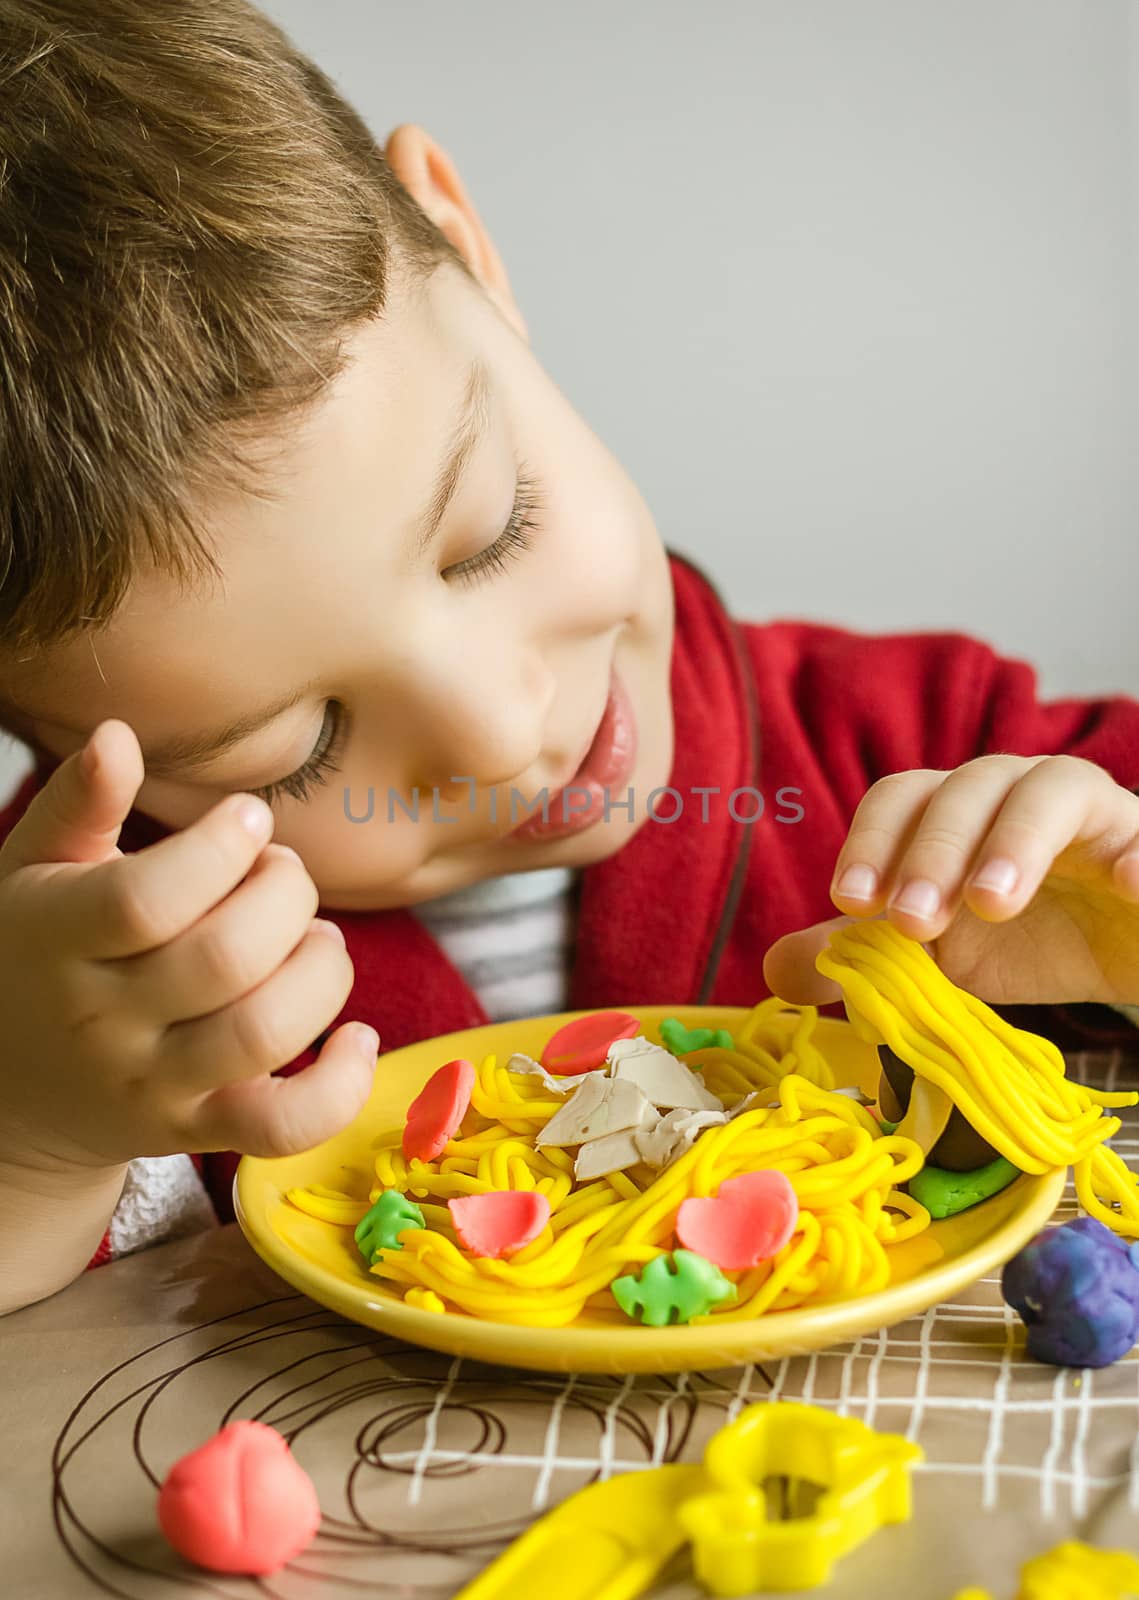 Cute child playing with his original spaghetti dish, made with colorful plasticine